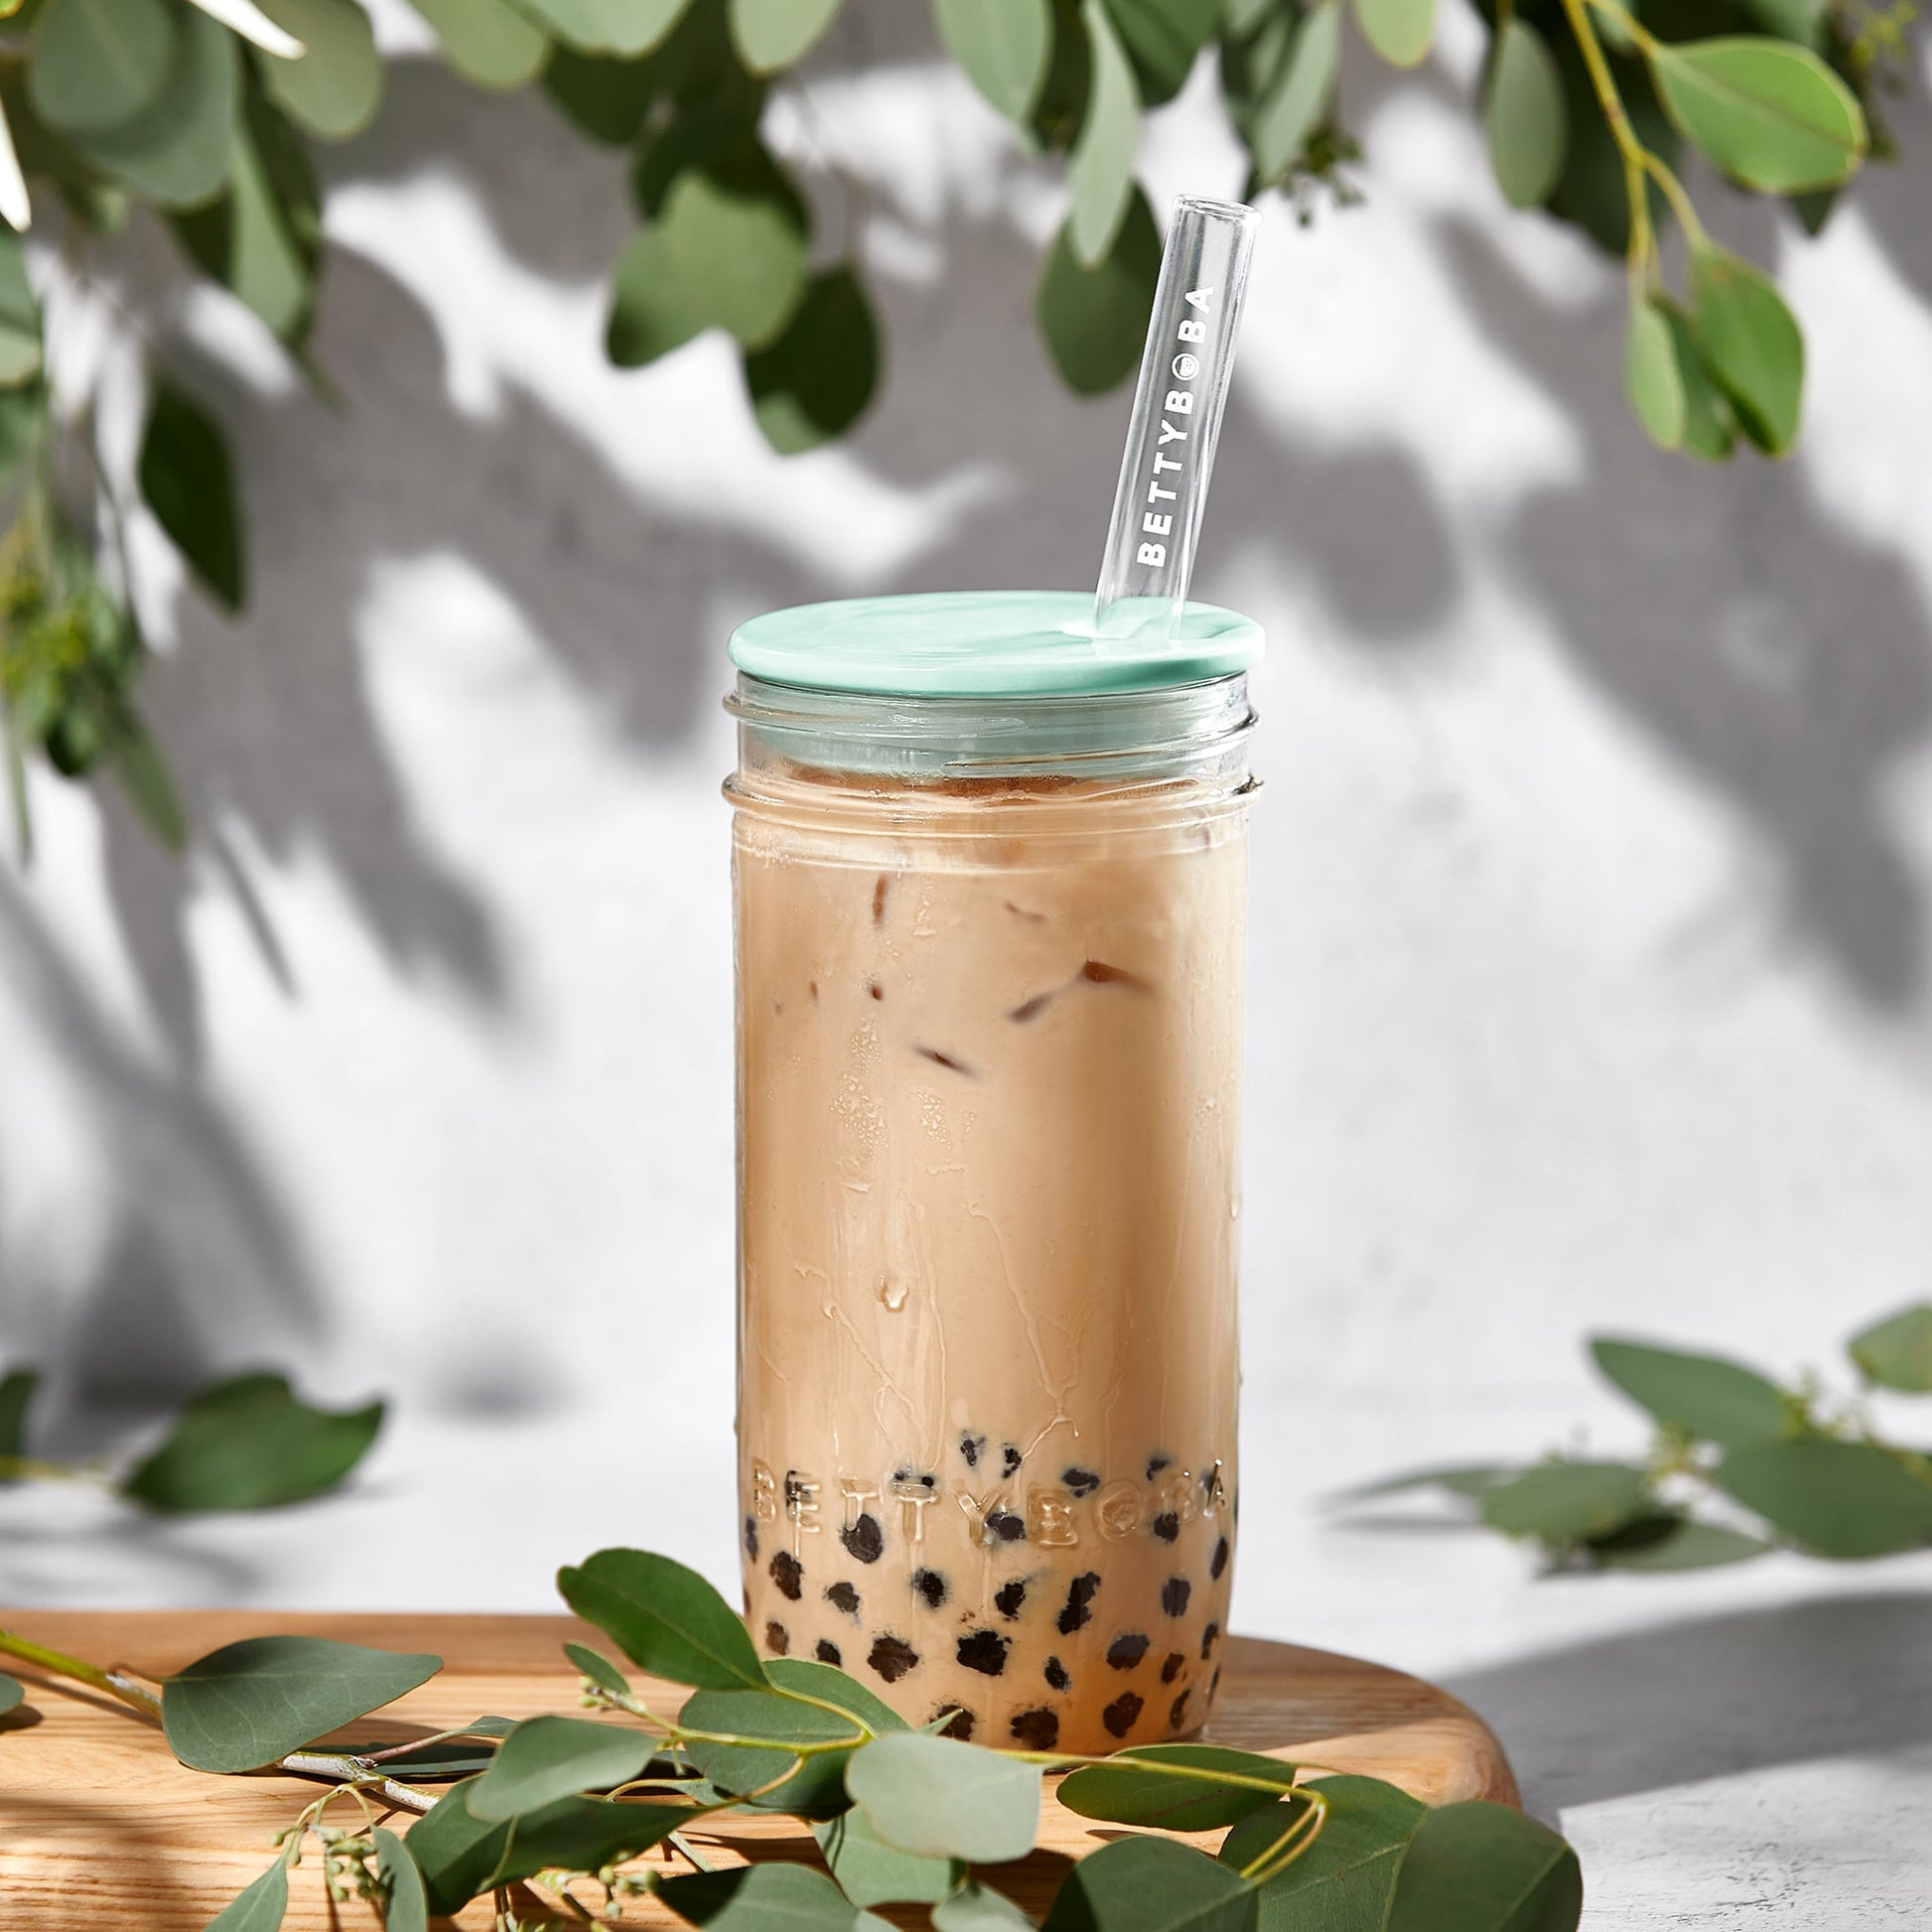 Hot Sell Iced Coffee Mug with Lid and Straw for Milk and Tea